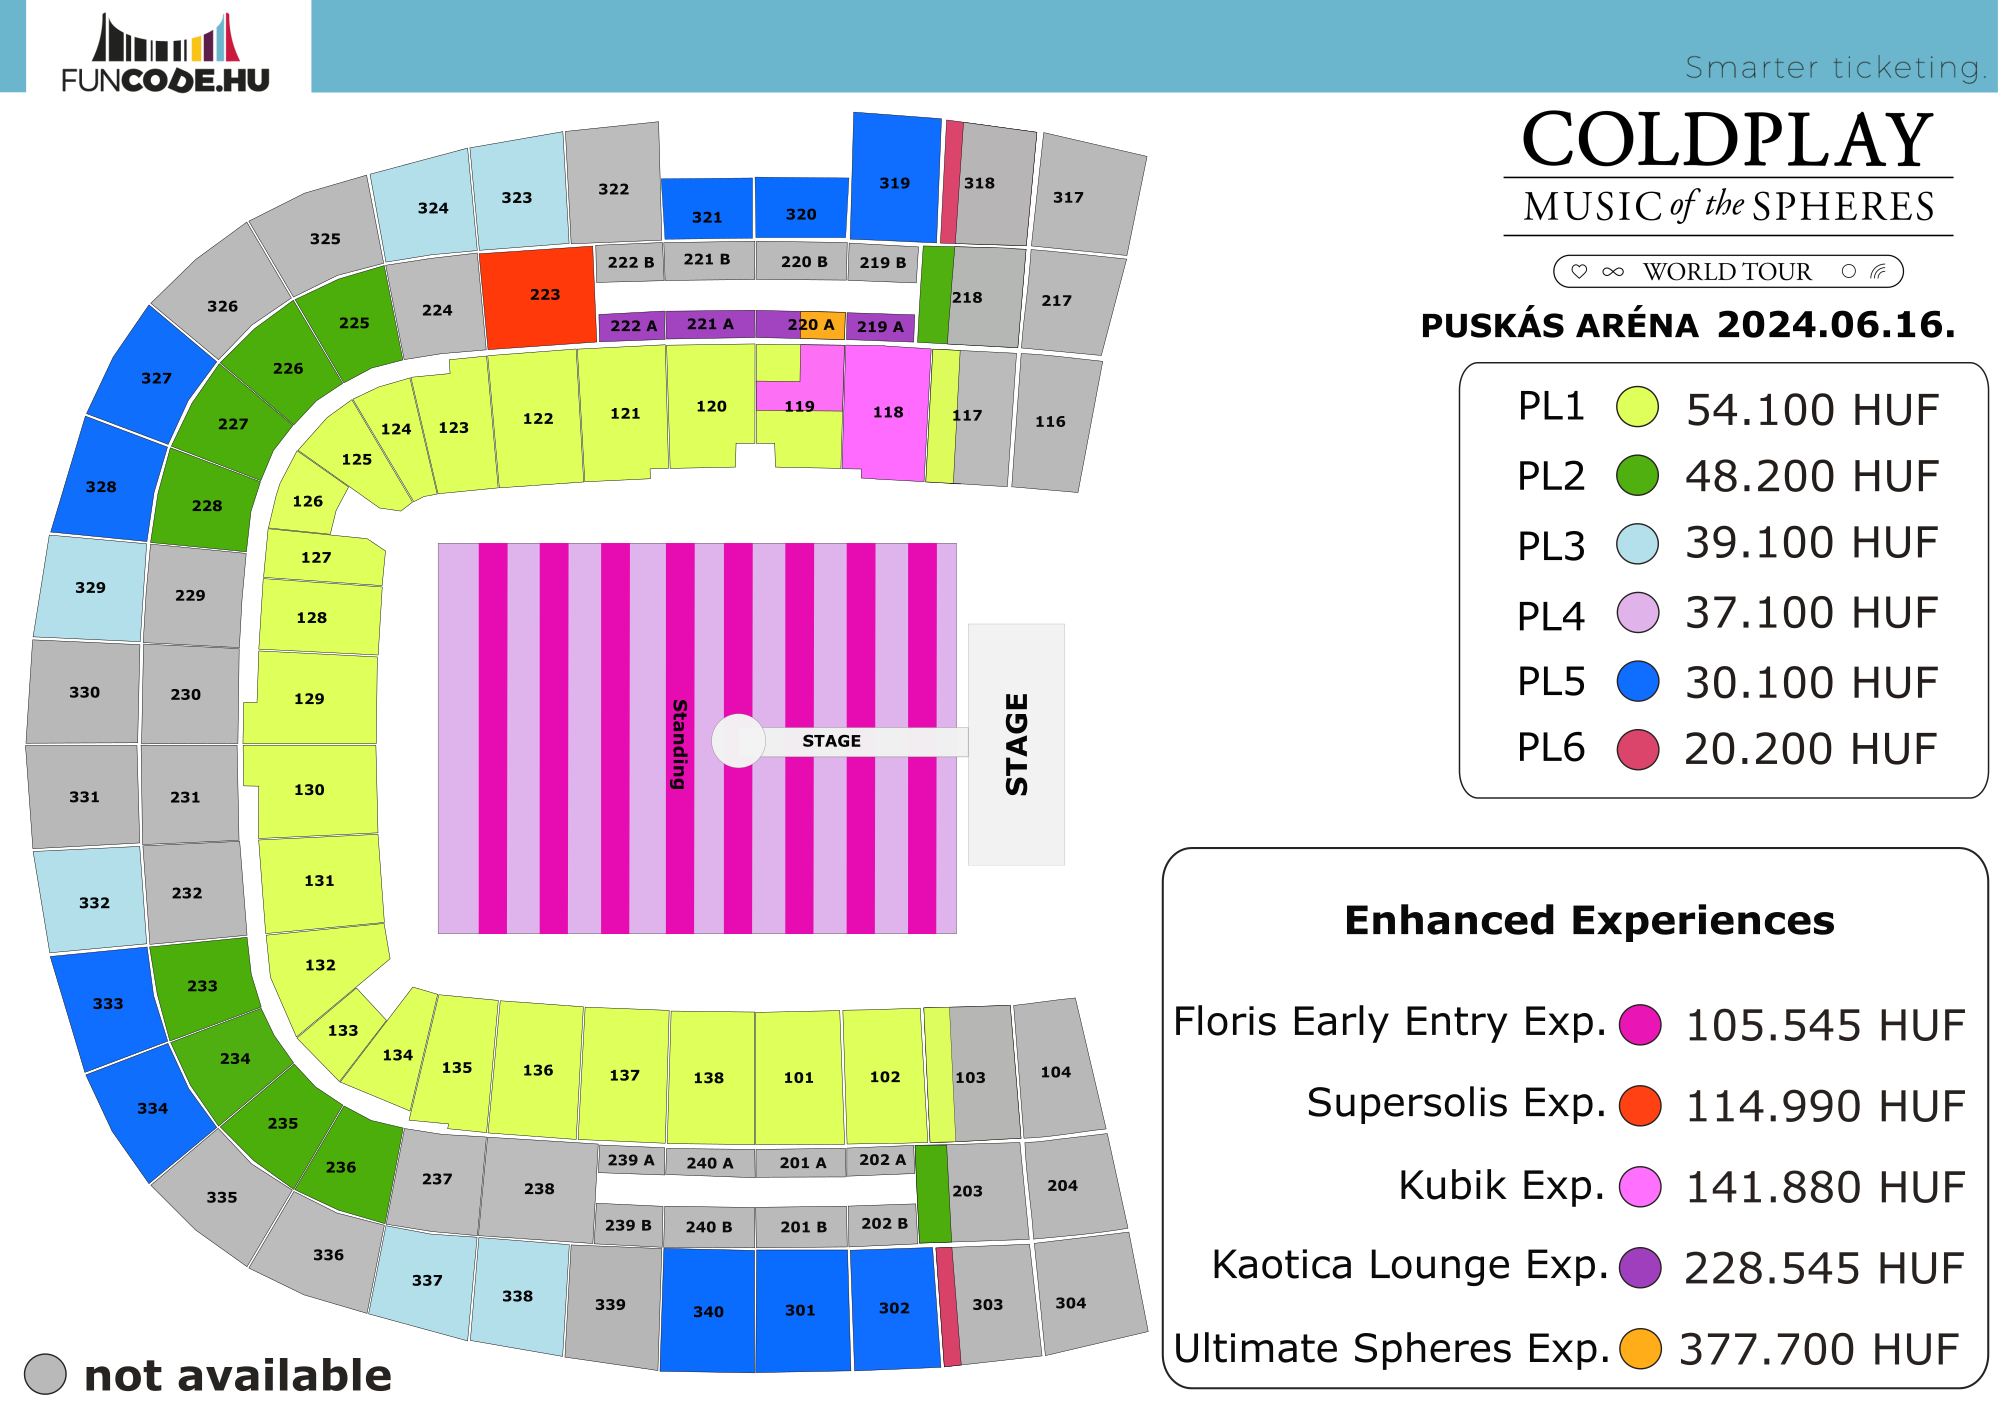 coldplay16_pricemap_07.25